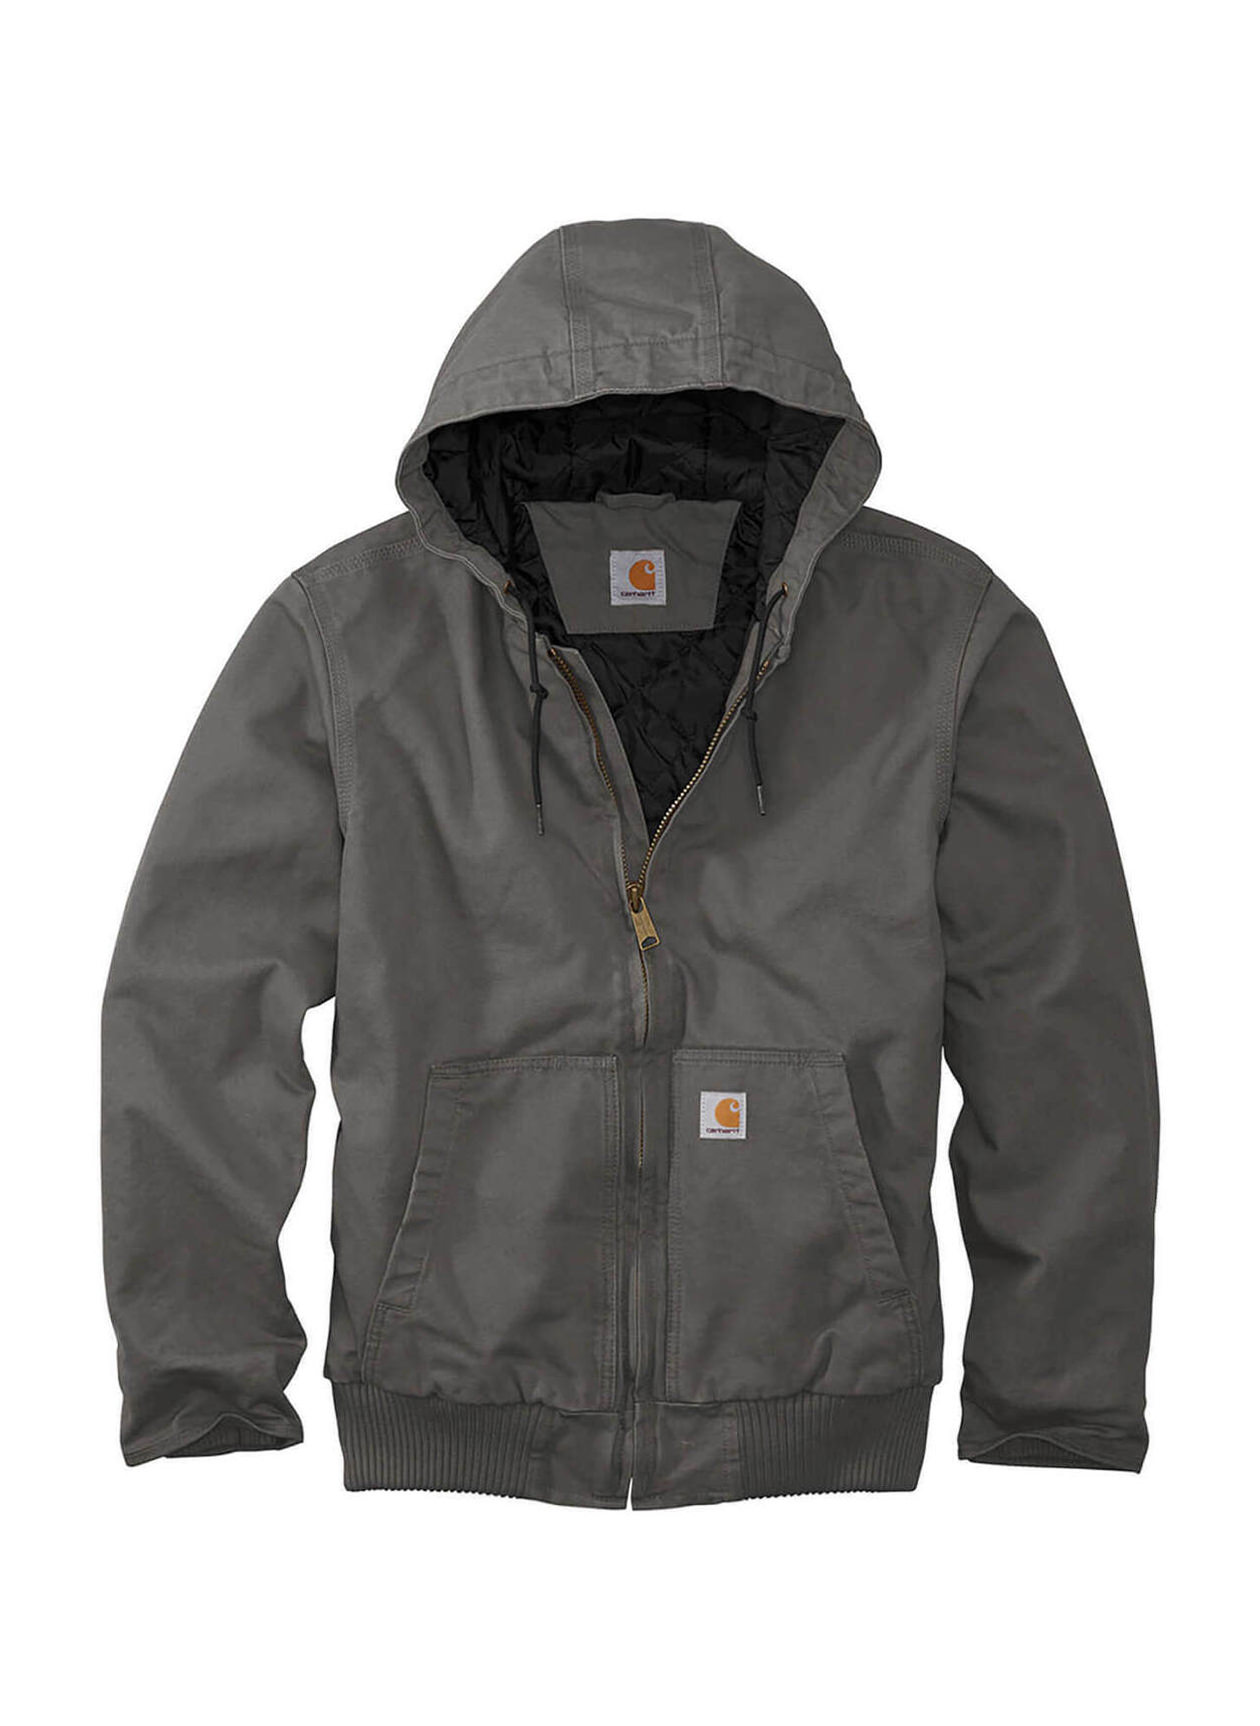 Carhartt Men's Gravel Washed Duck Active Jacket | Custom Embroidered ...